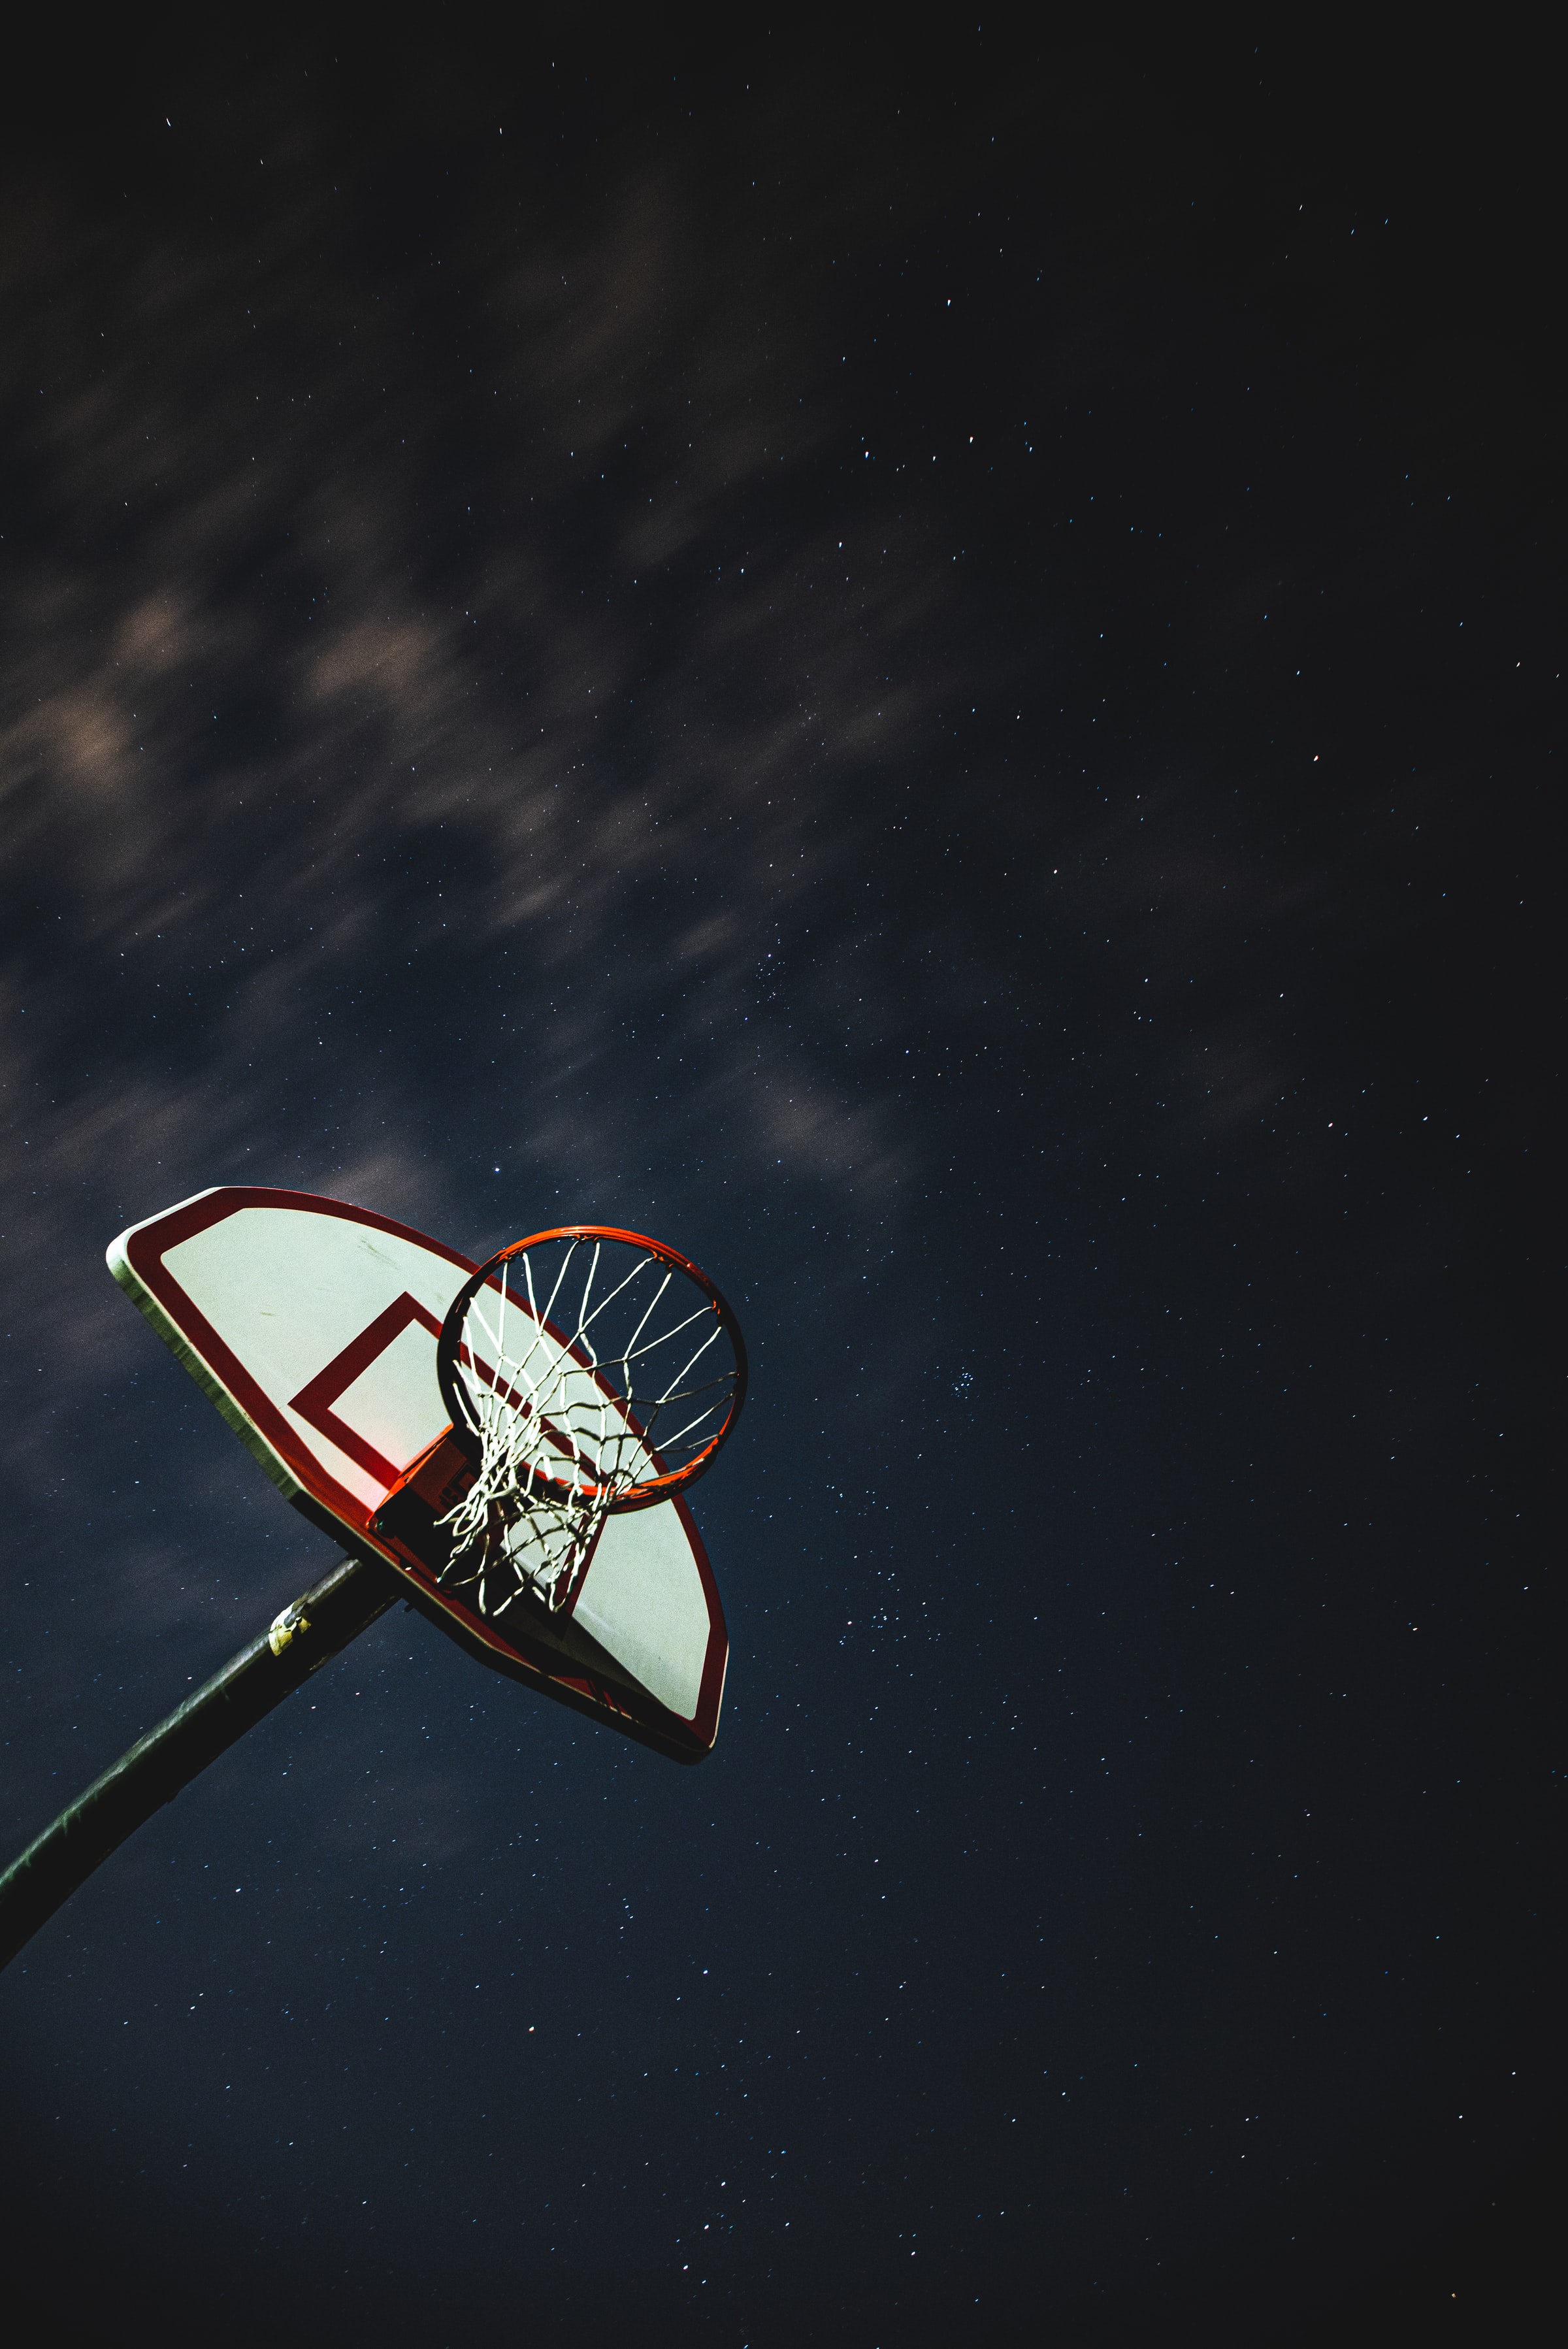 basketball grid, basketball net, shield, miscellanea collection of HD images